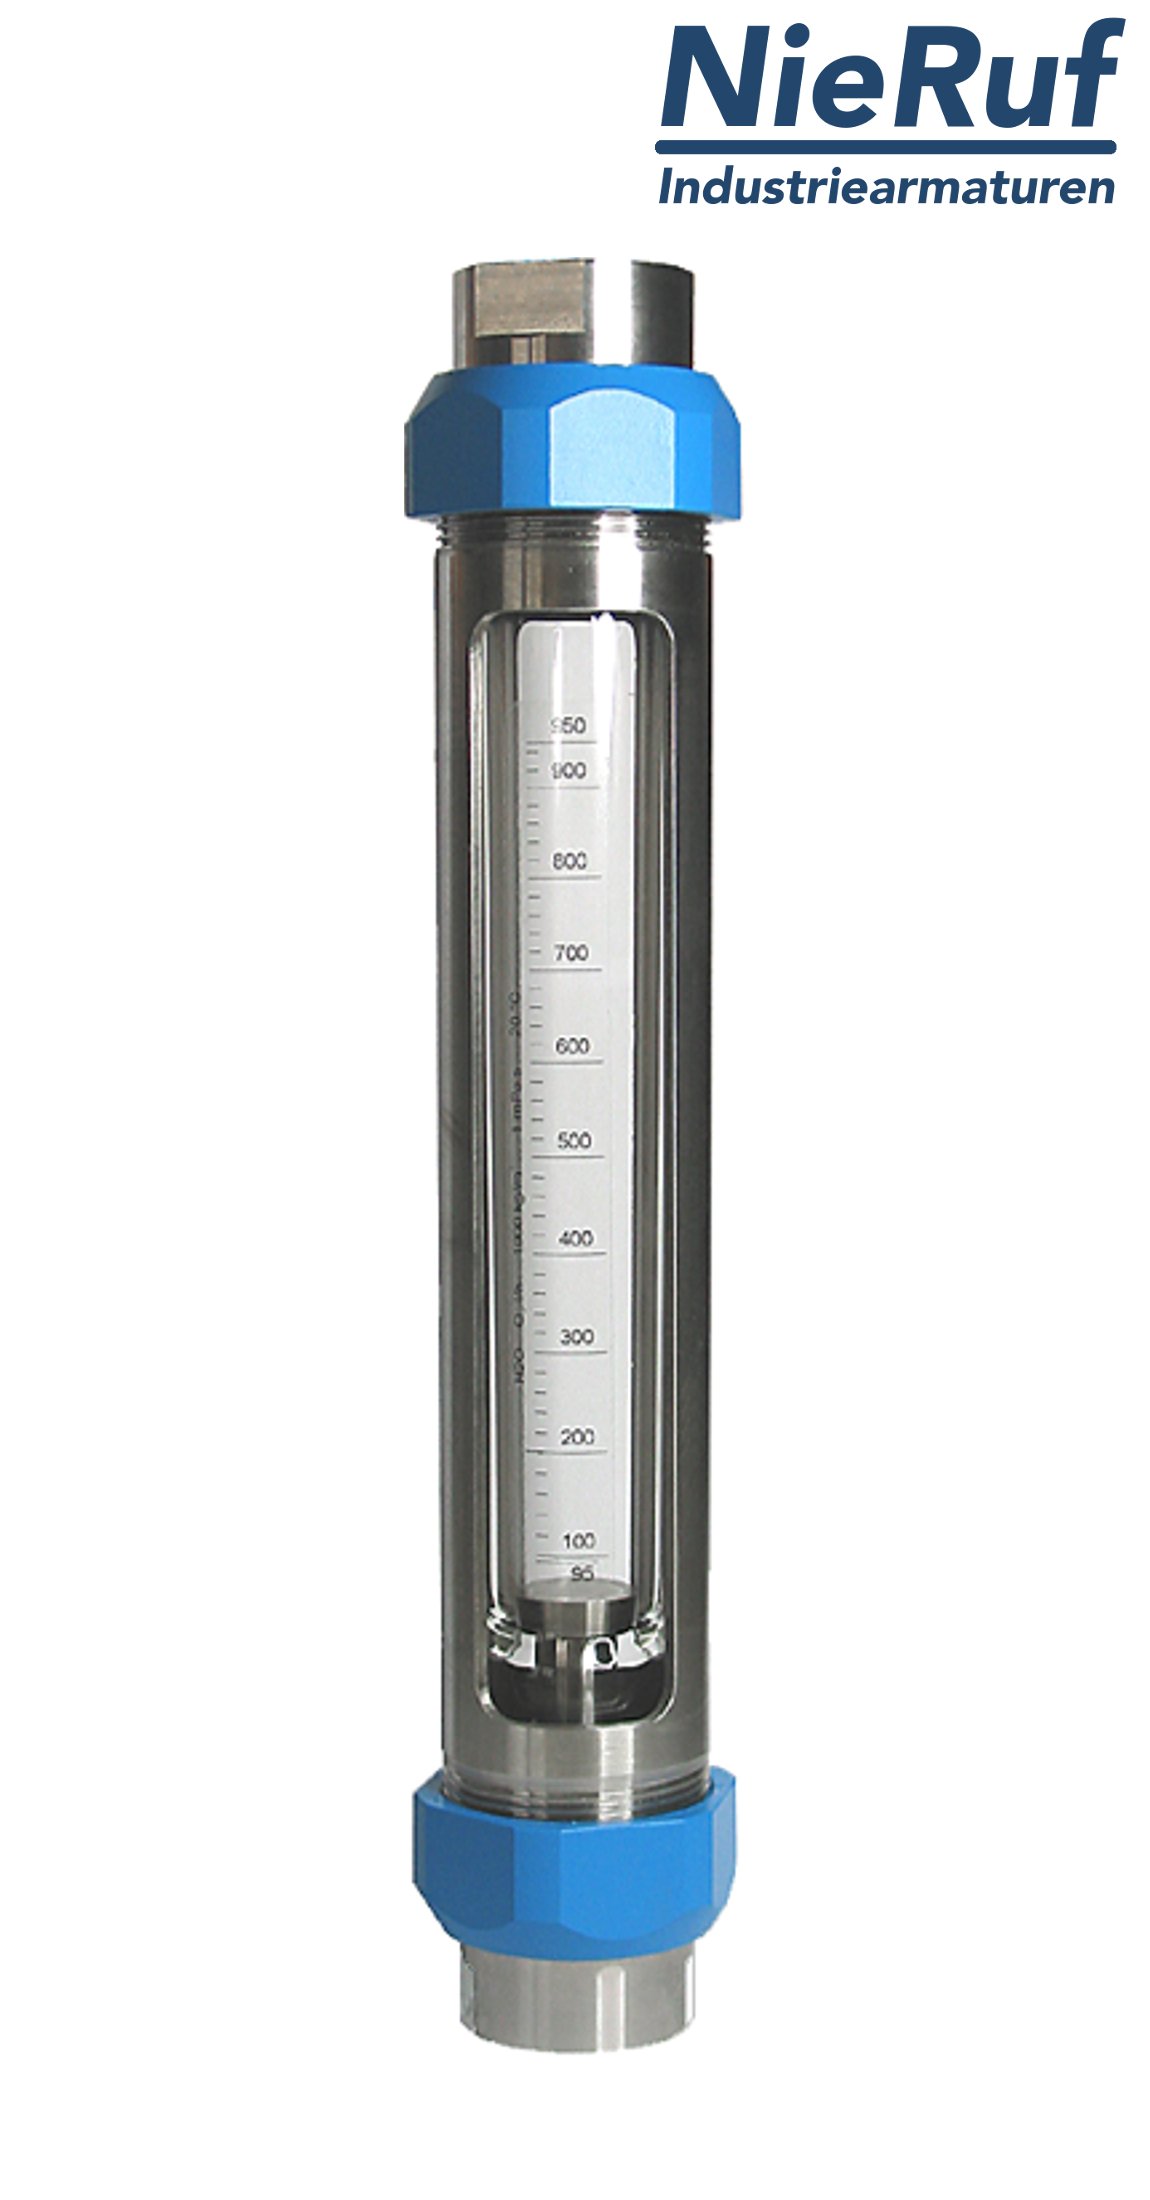 Variable area flowmeter stainless steel + borosilicate 1/2" inch 50.0 - 500.0 l/h air EPDM